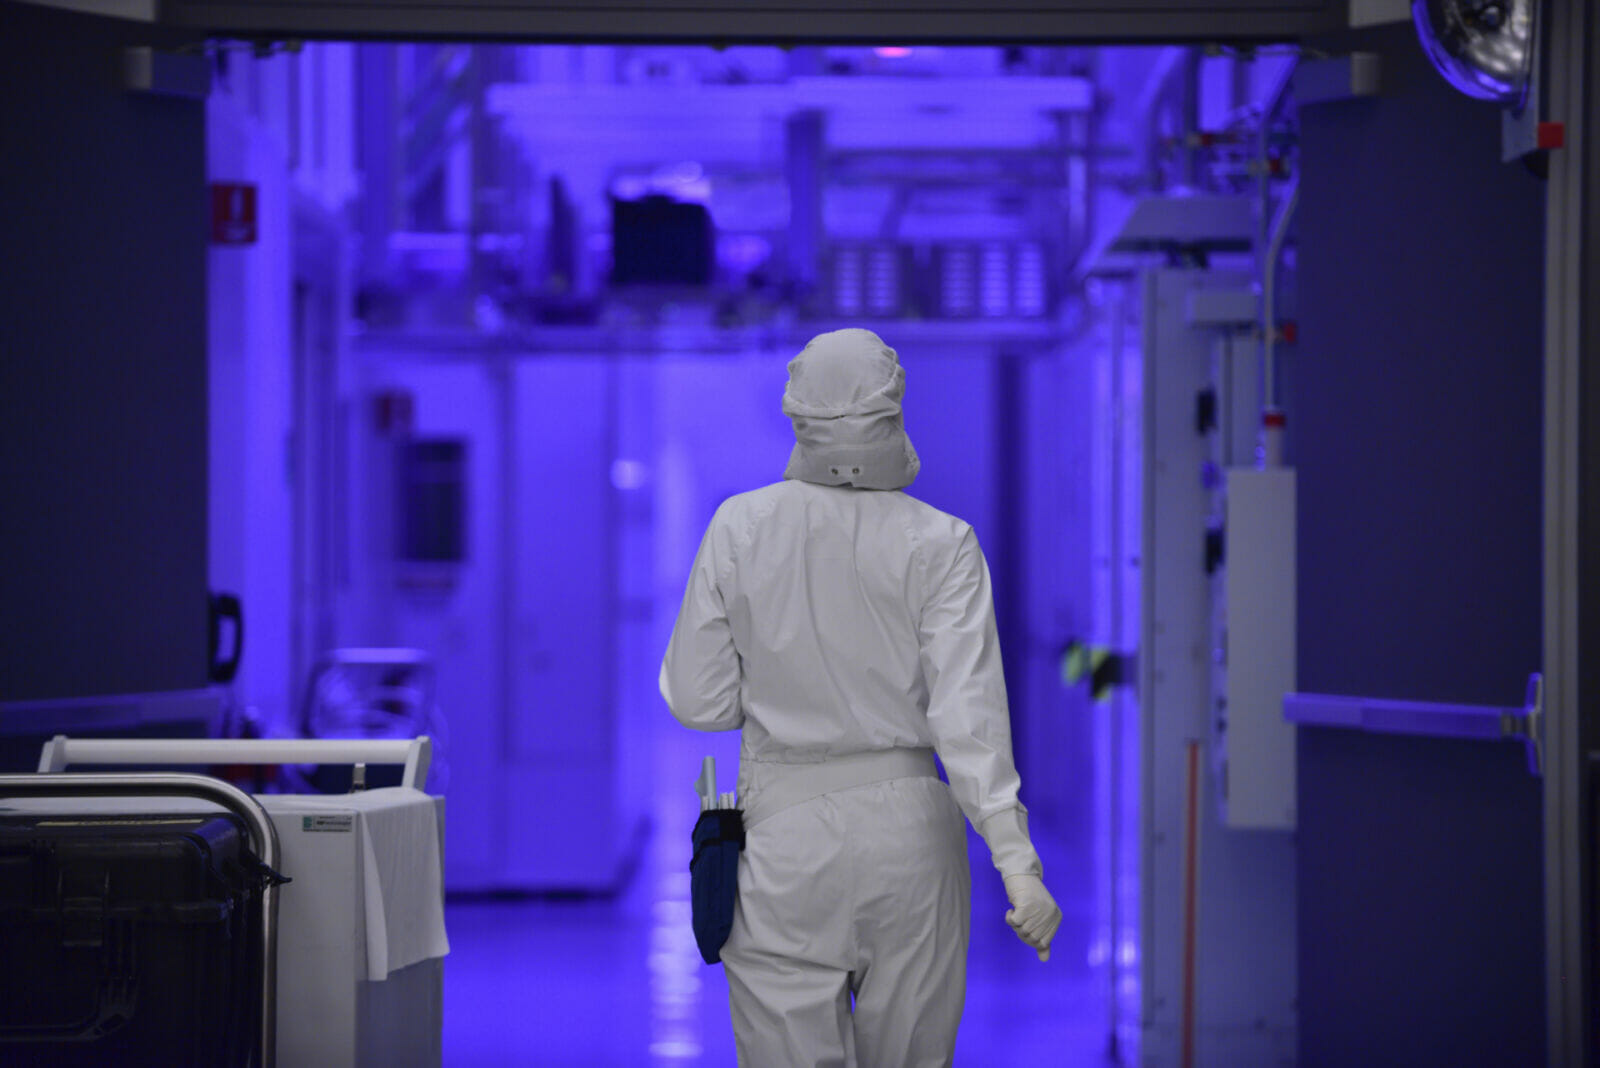 Semiconductor manufacturers work on an unfathomably small scale that requires a specialized cleanroom to avoid chip malfunctions.